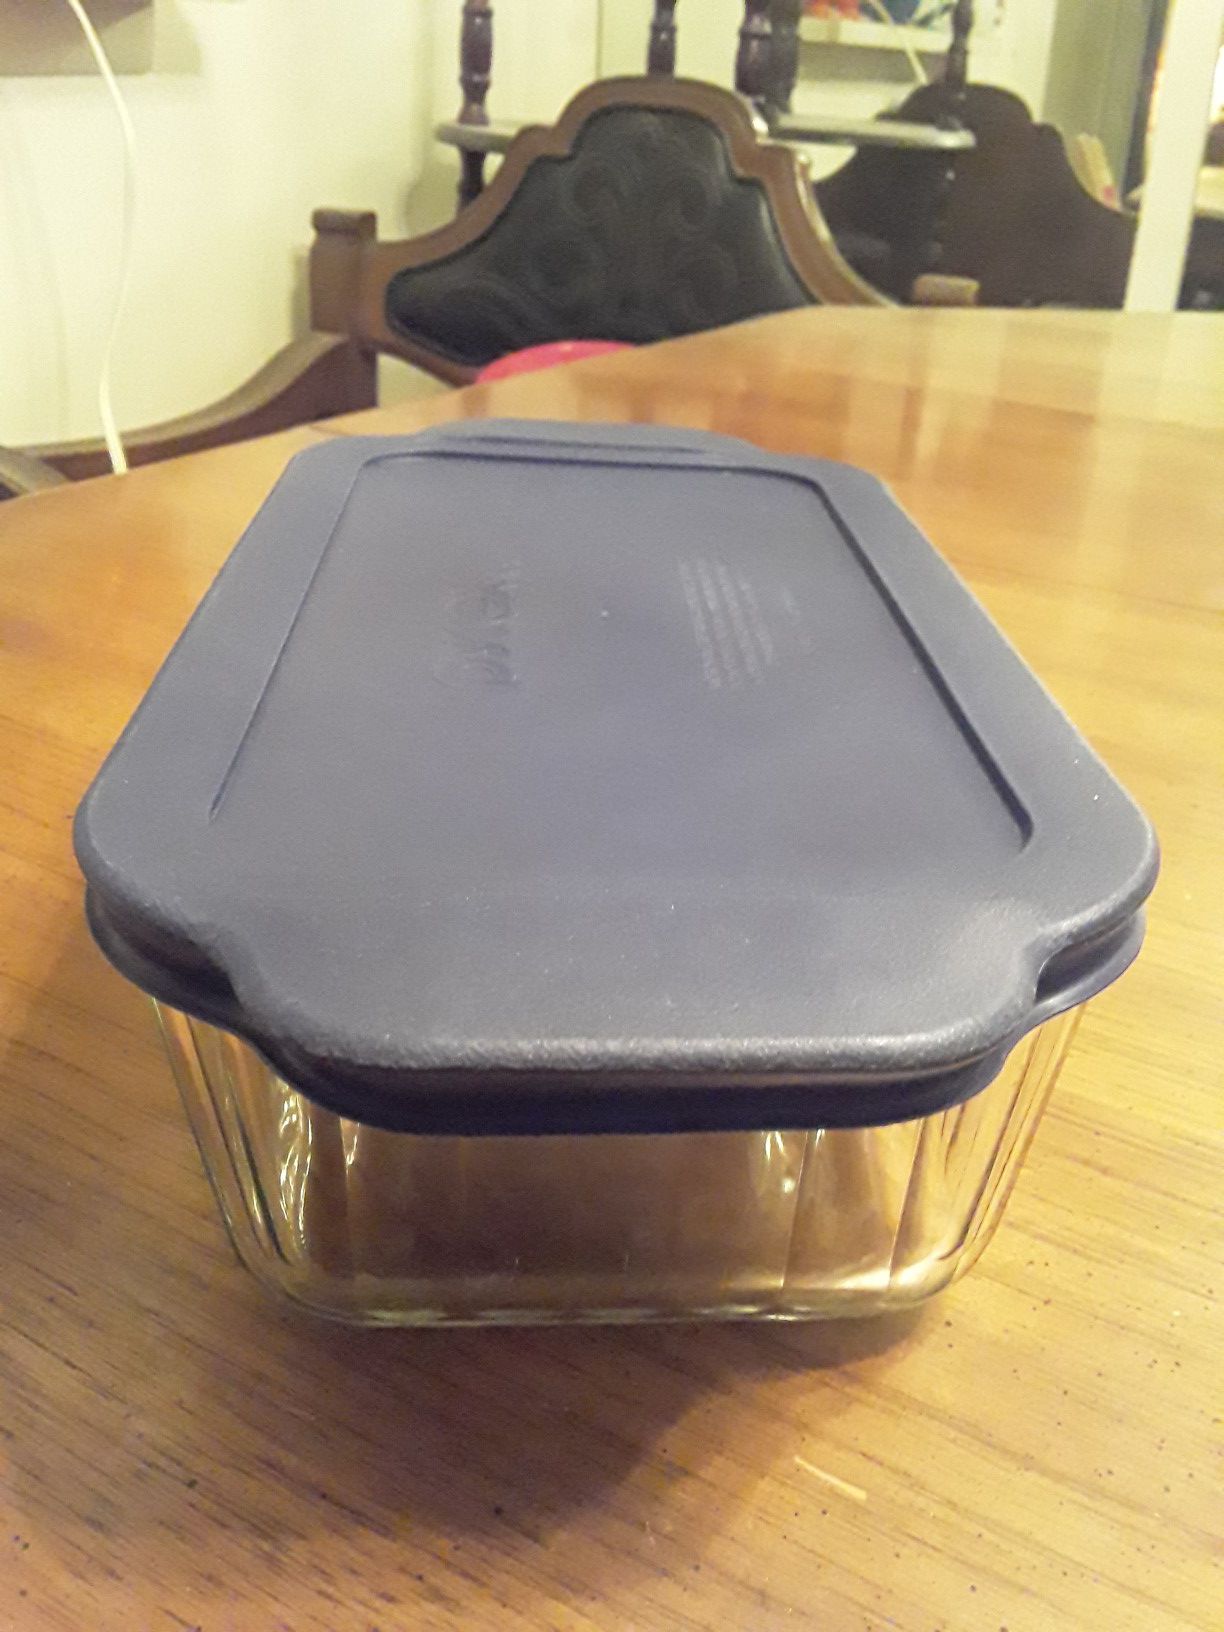 Original Pyrex Ribbed Loaf Pan with Lid - MADE IN USA - 1.5 QT 8 1/2" x 4 1/2" x 2 1/2"H